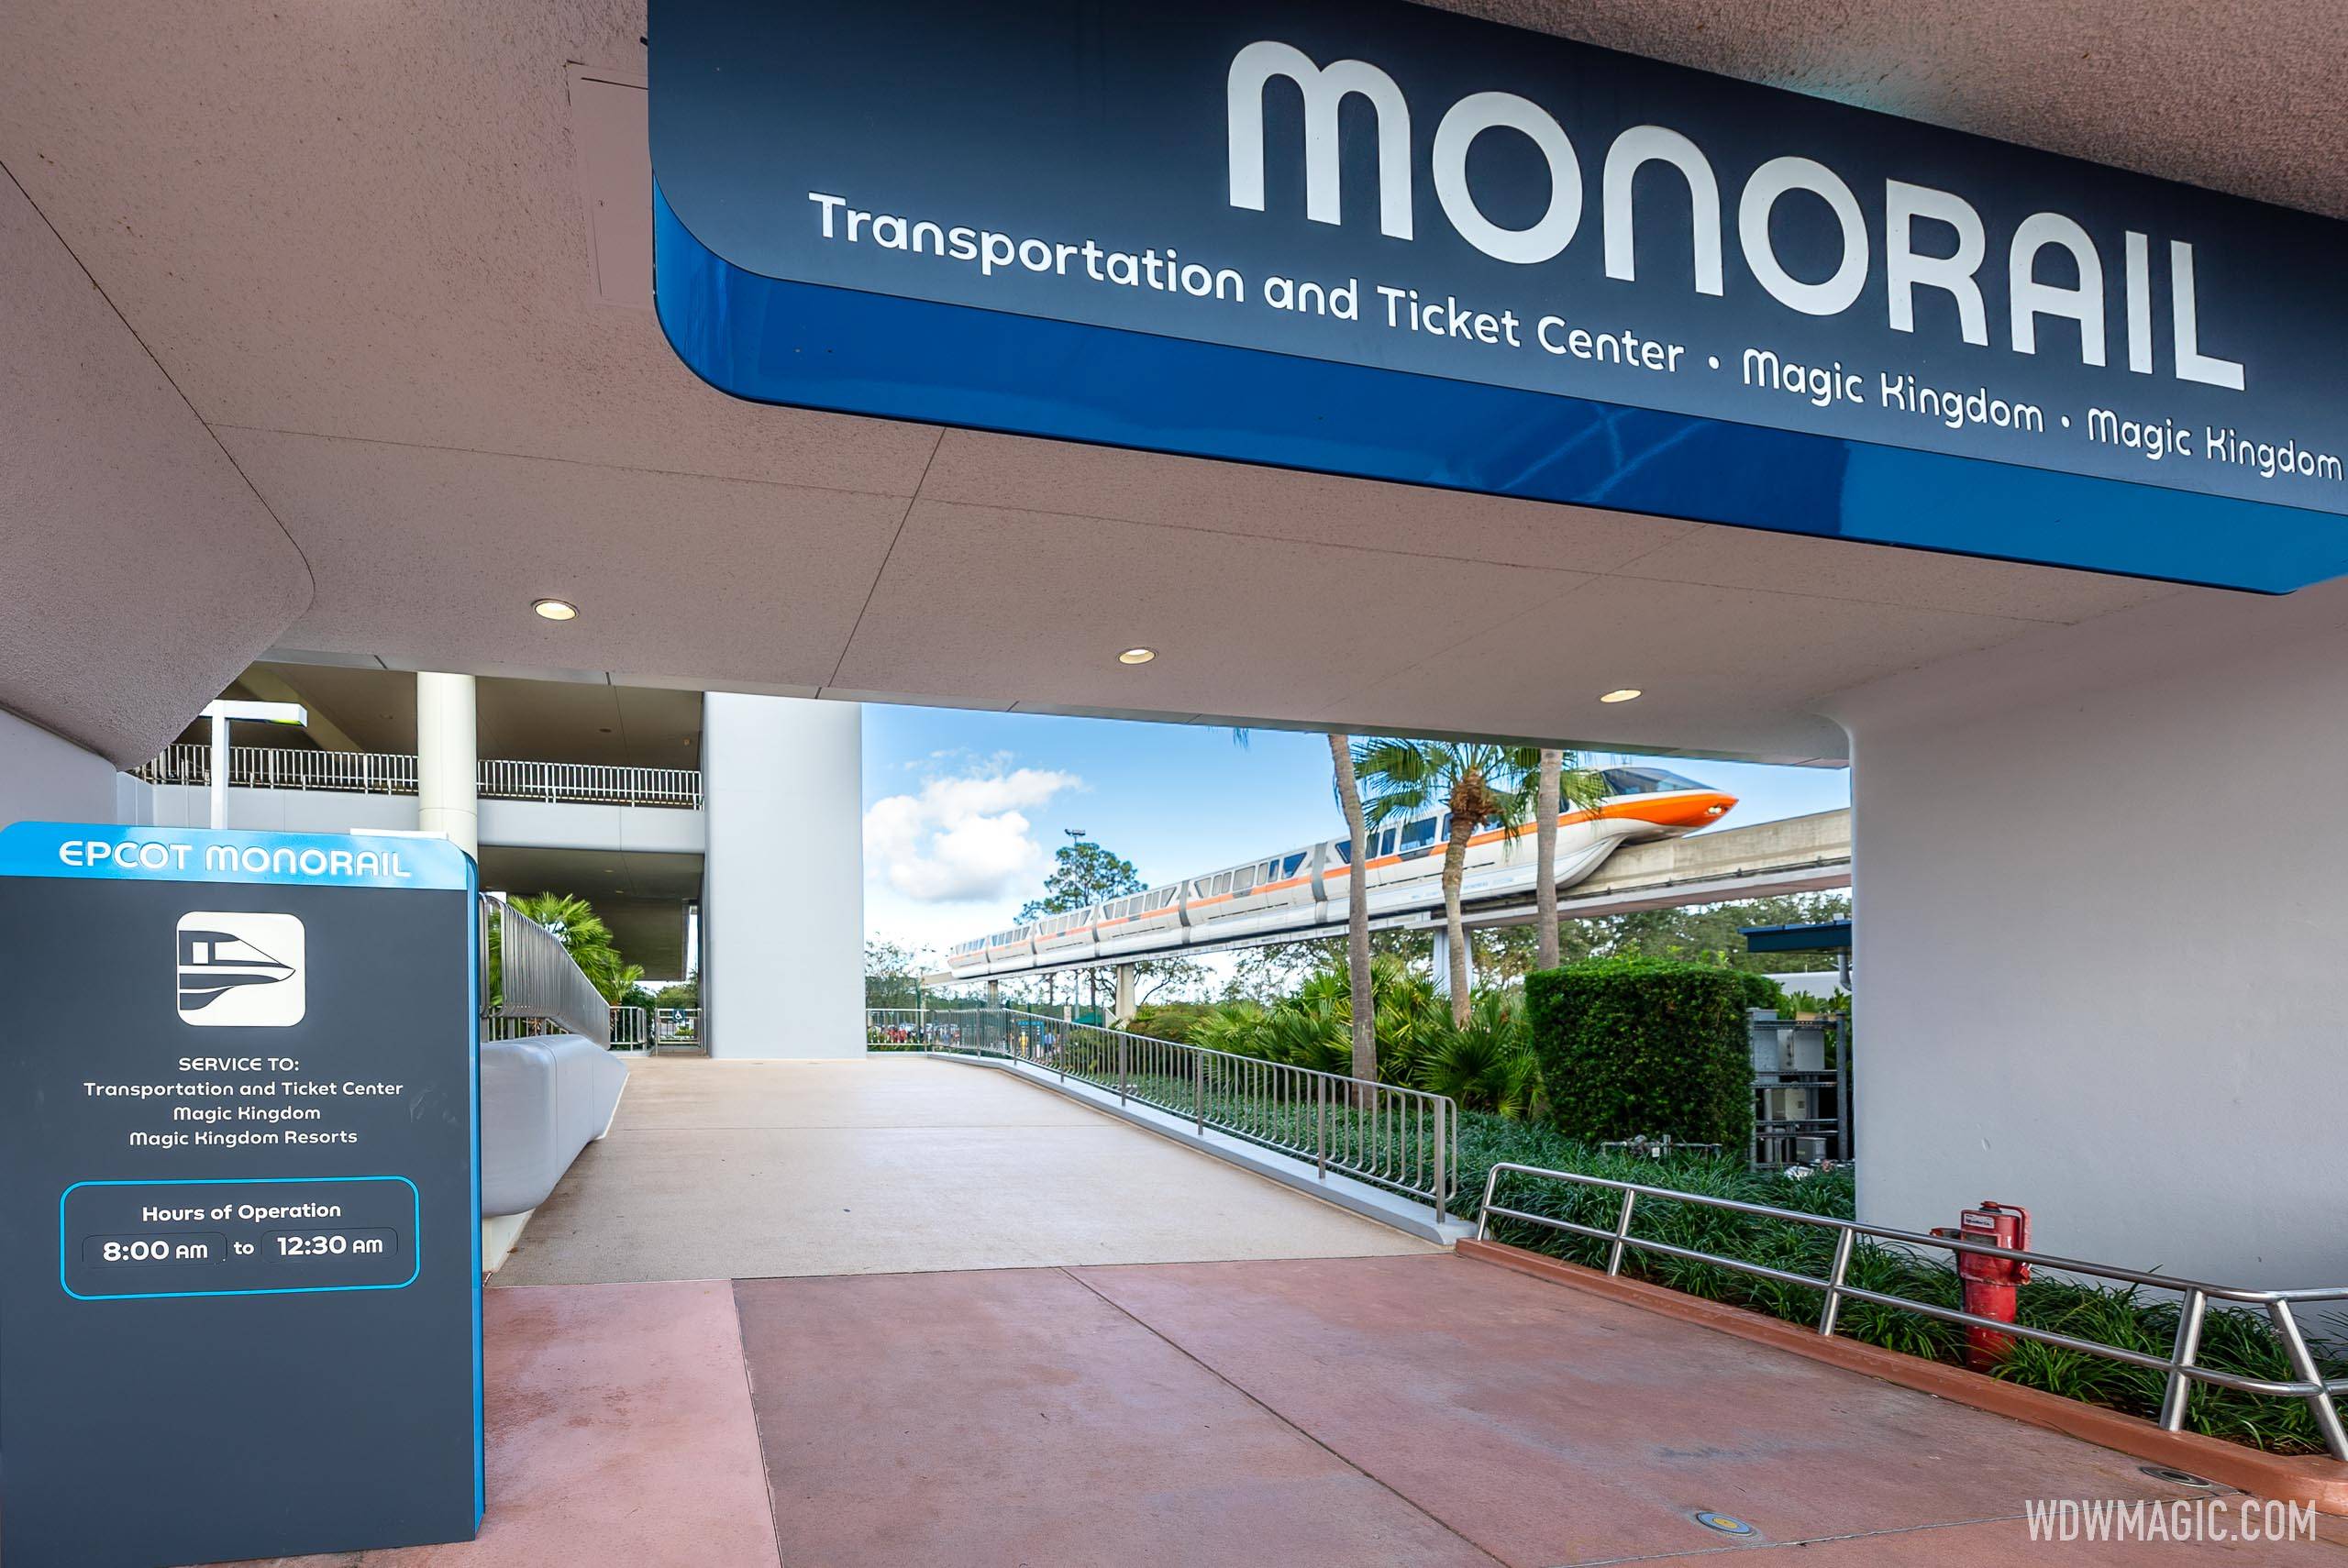 Monorail operating hours signage at EPCOT monorail station